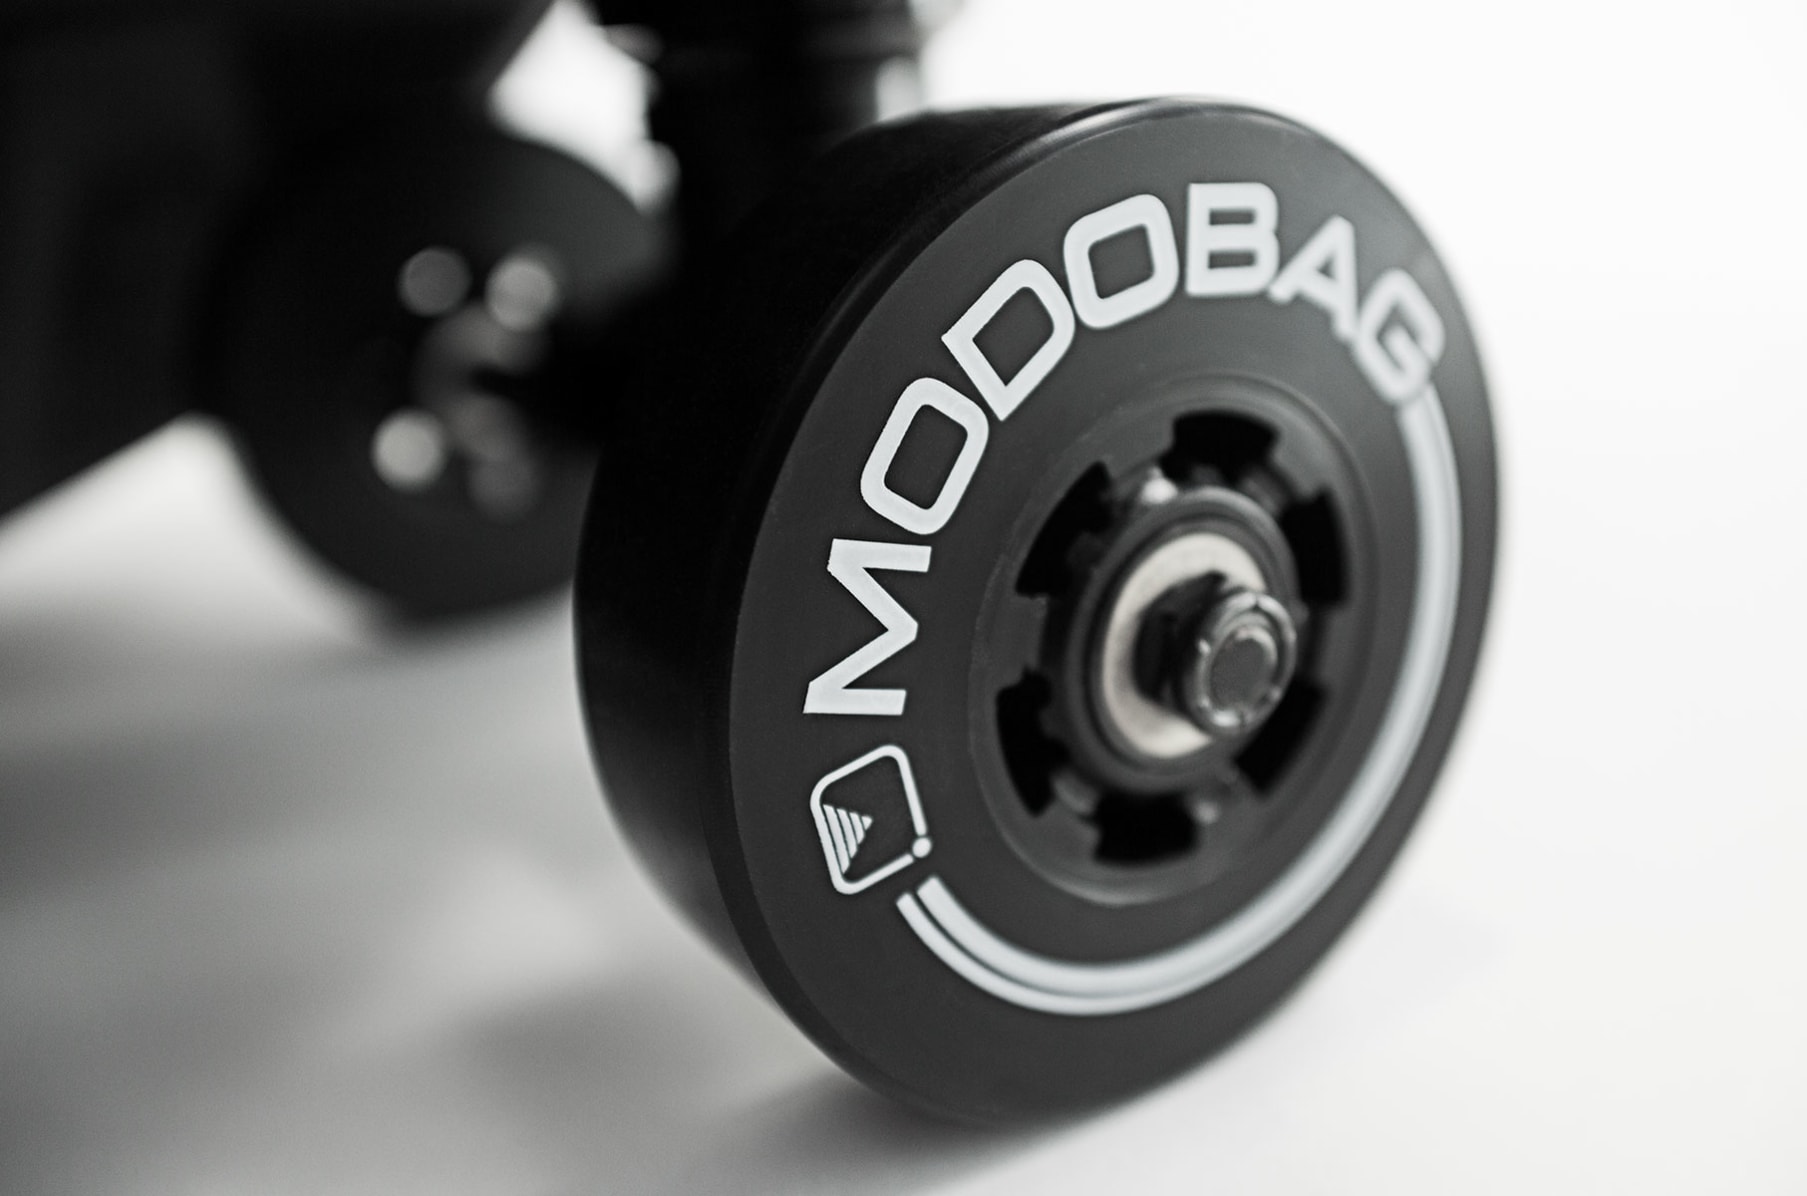 Modobag® - The World's ONLY Motorized, Smart, Connected Carry-on Luggage!